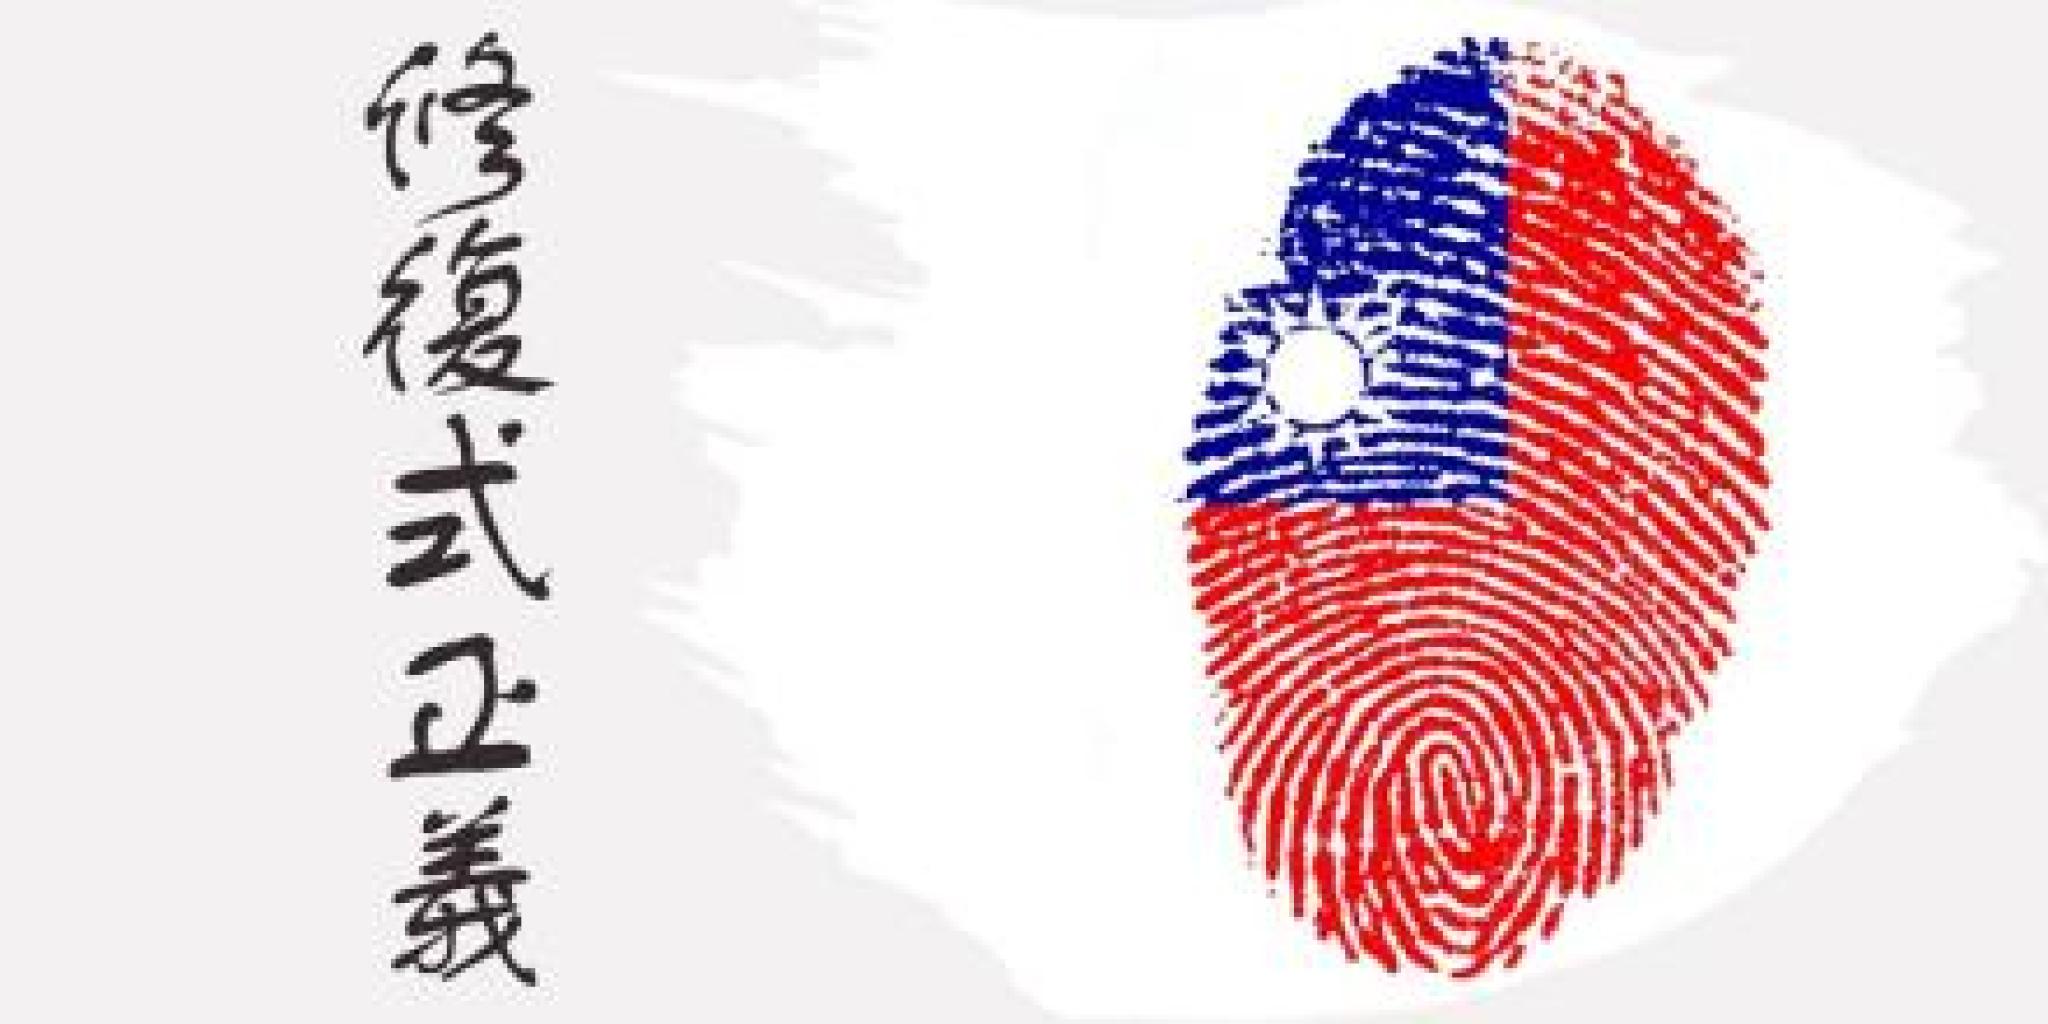 Image credit: Illustration of Taiwanese flag in a fingerprint pattern by CatsWithGlasses on pixabay (free to use under pixabay licence); ‘Restorative Justice’ Chinese calligraphy output from https://chinese.gratis, used with permission.